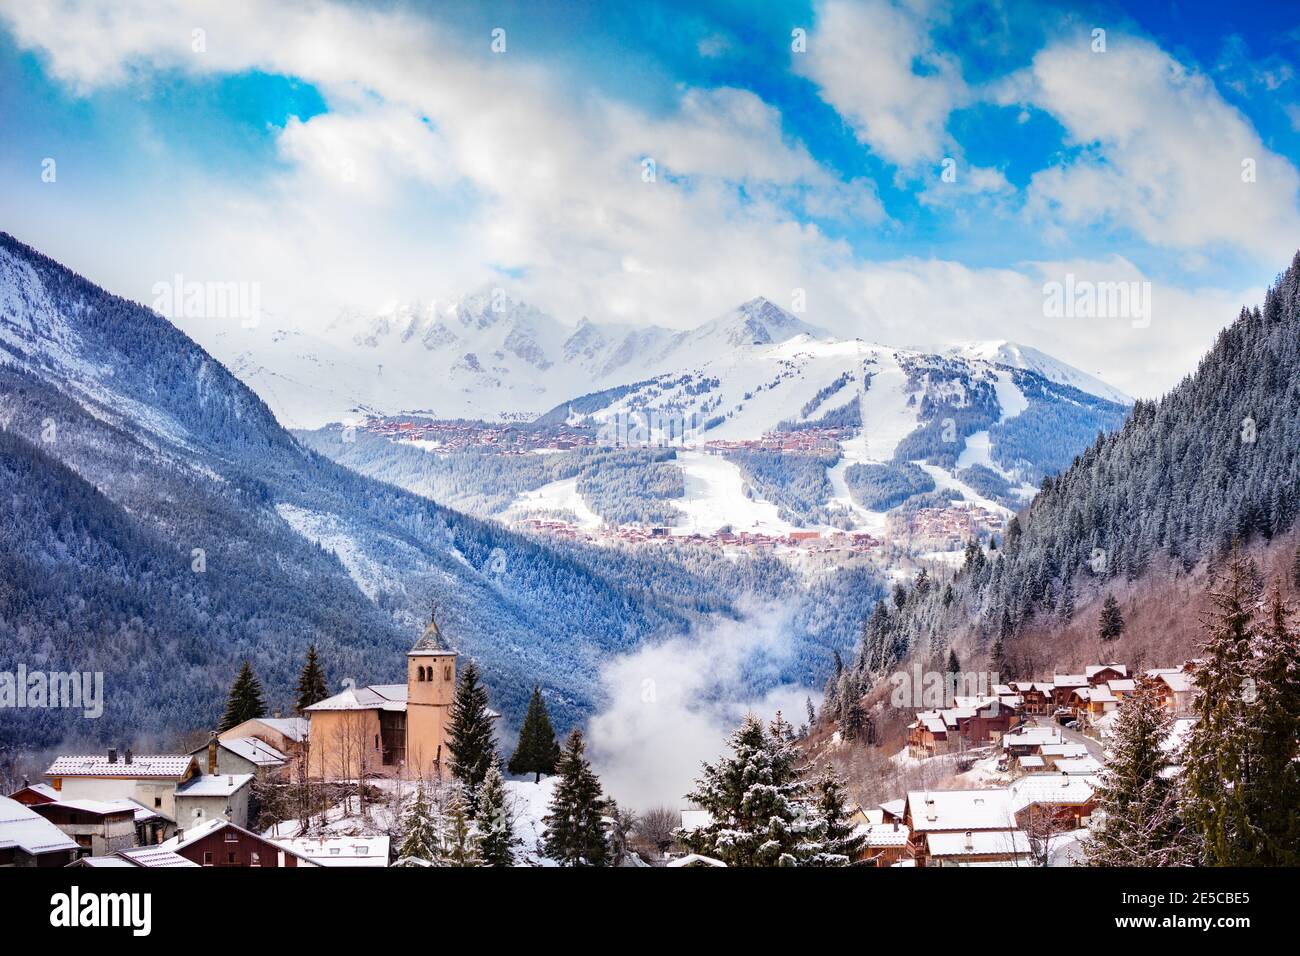 Panorama of Champagny-en-Vanoise village with mist and clouds around old church, over Courchevel resort on background Stock Photo